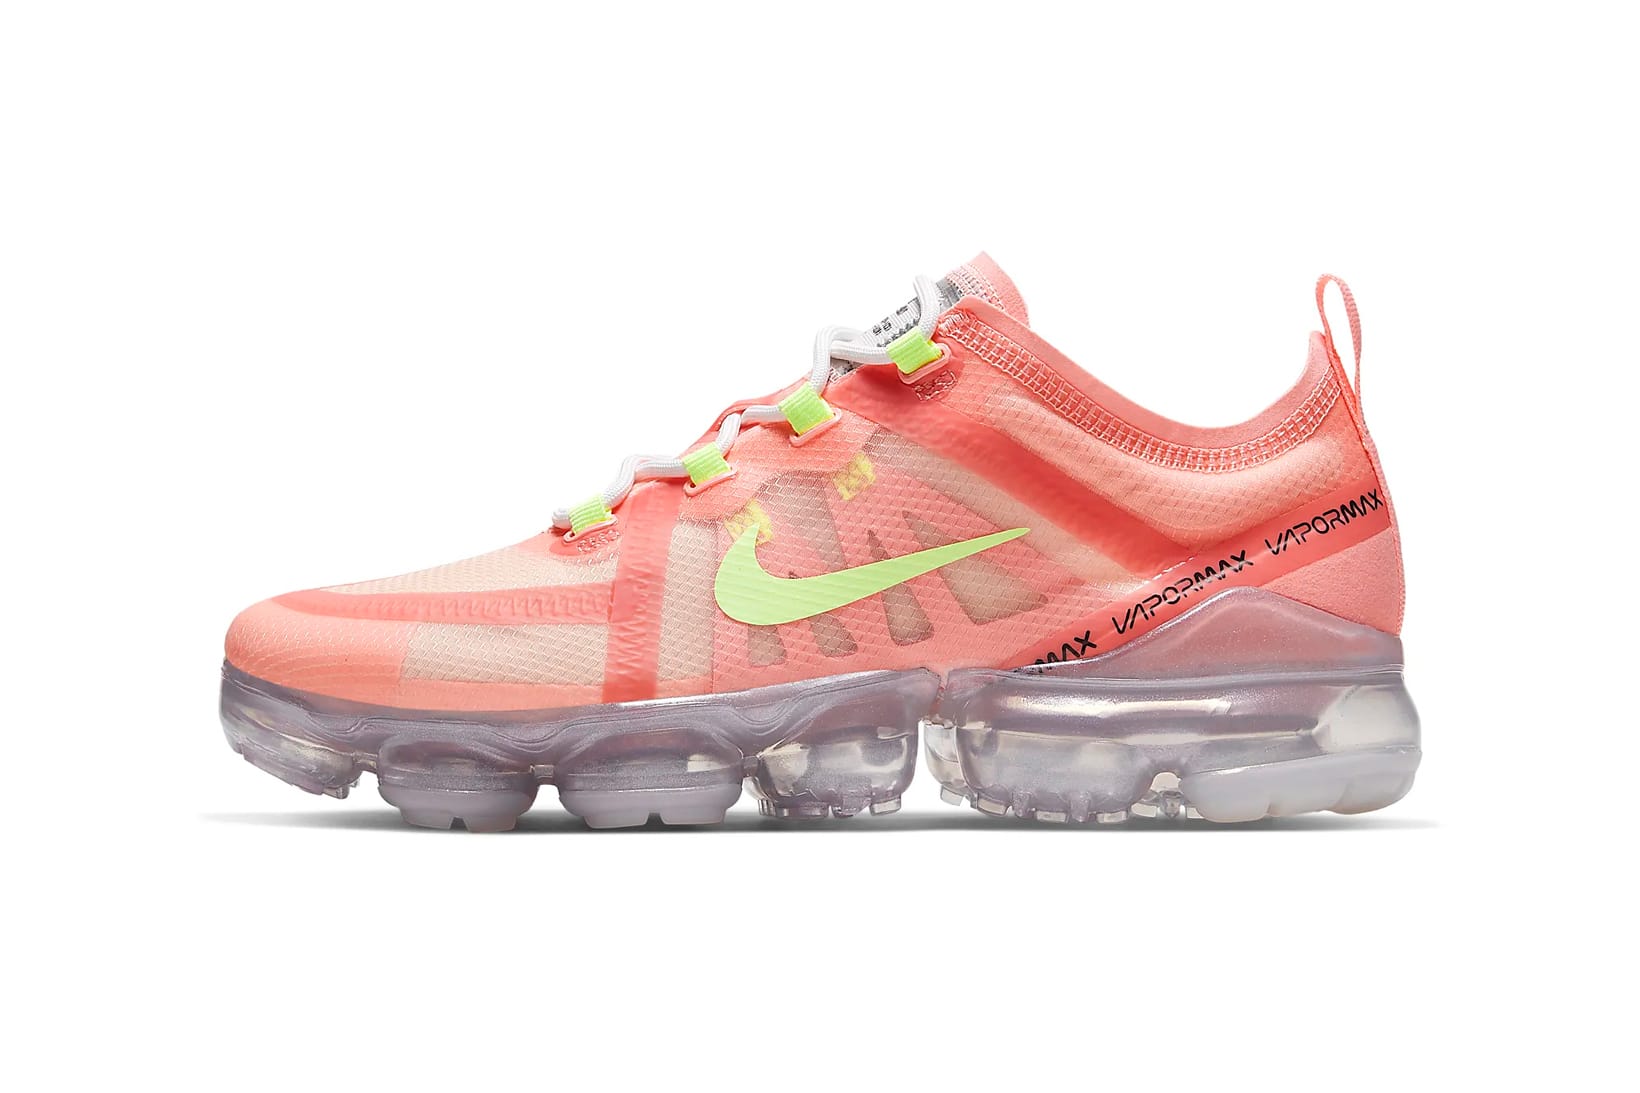 vapormax 2019 by you